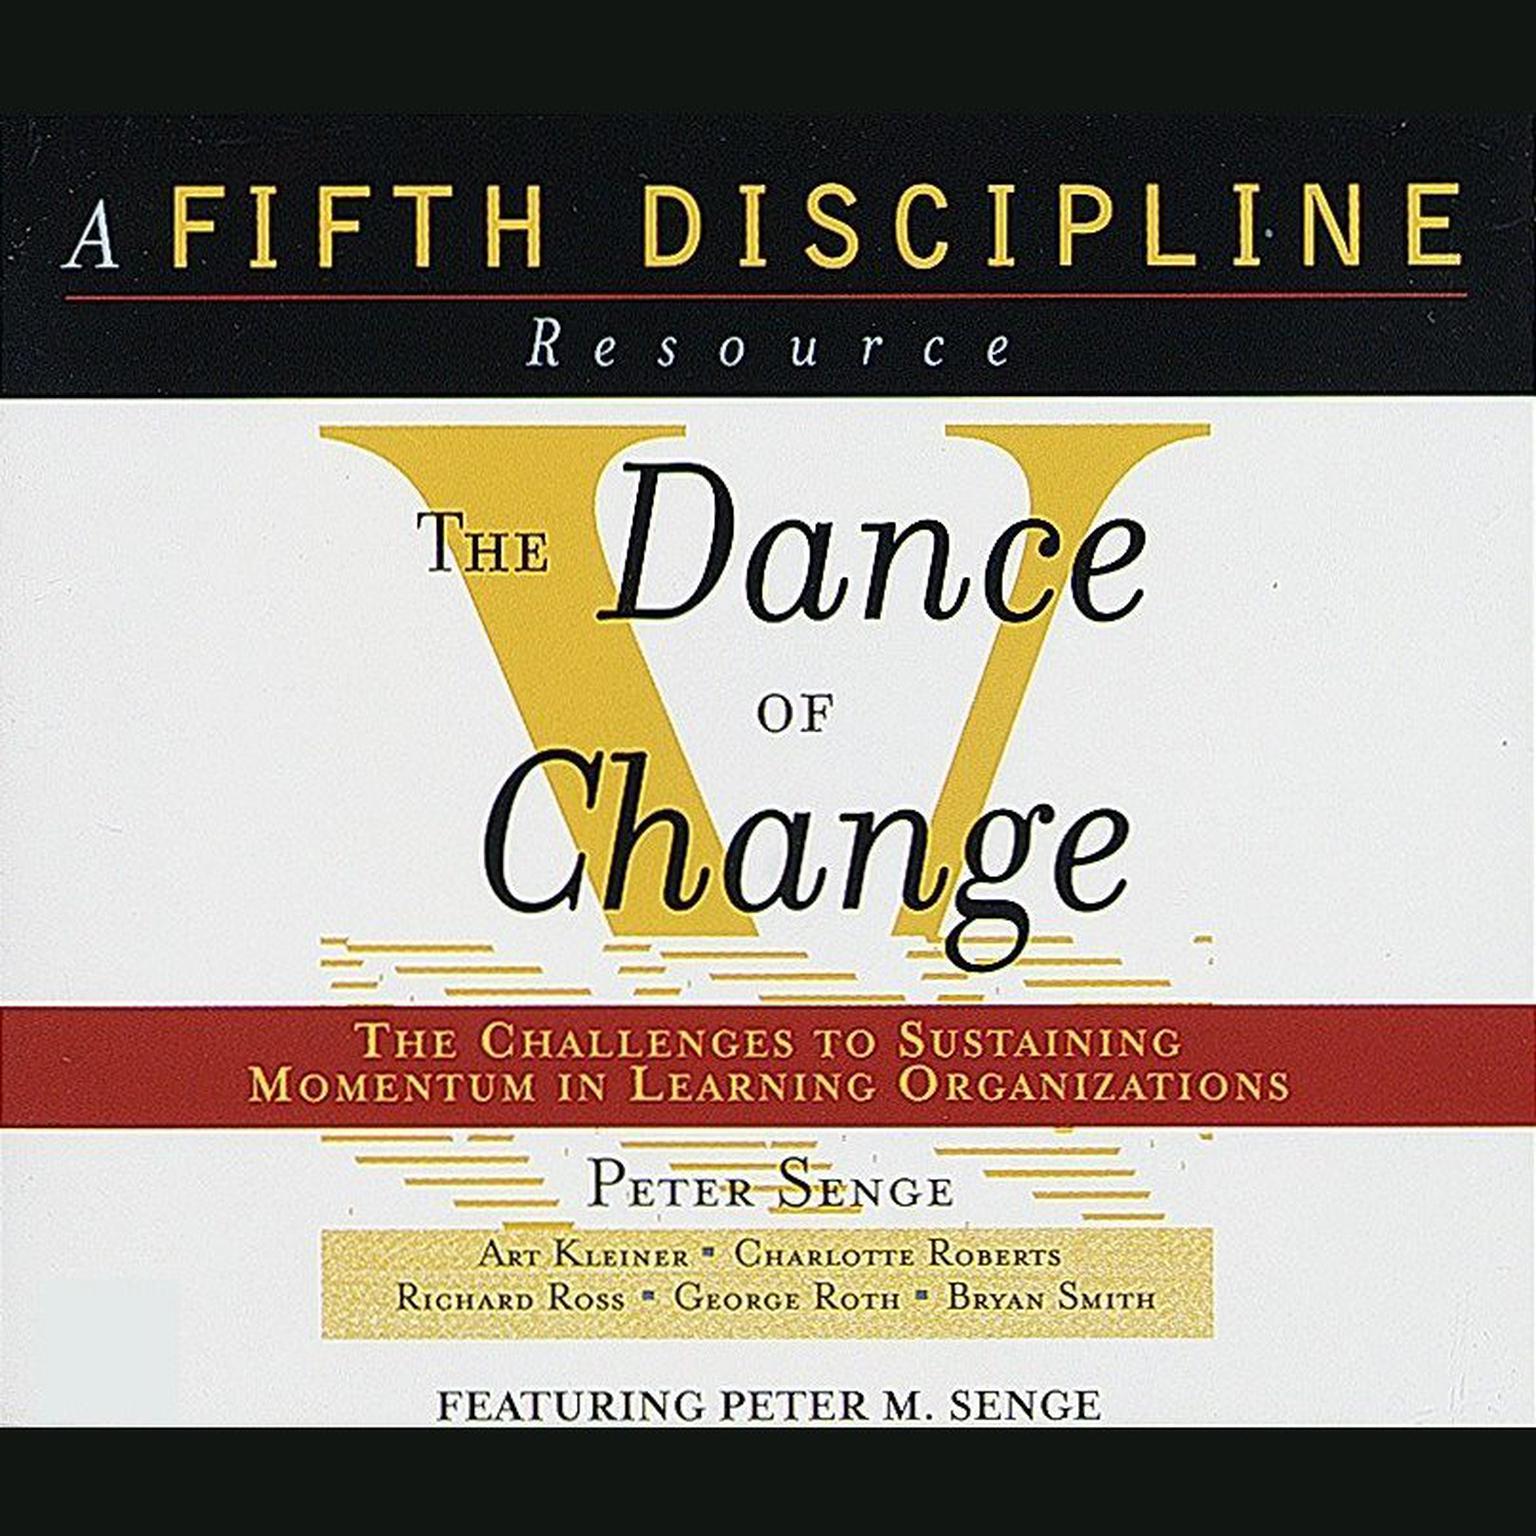 The Dance of Change (Abridged): The Challenges of Sustaining Momentum in Learning Organizations Audiobook, by Peter M. Senge